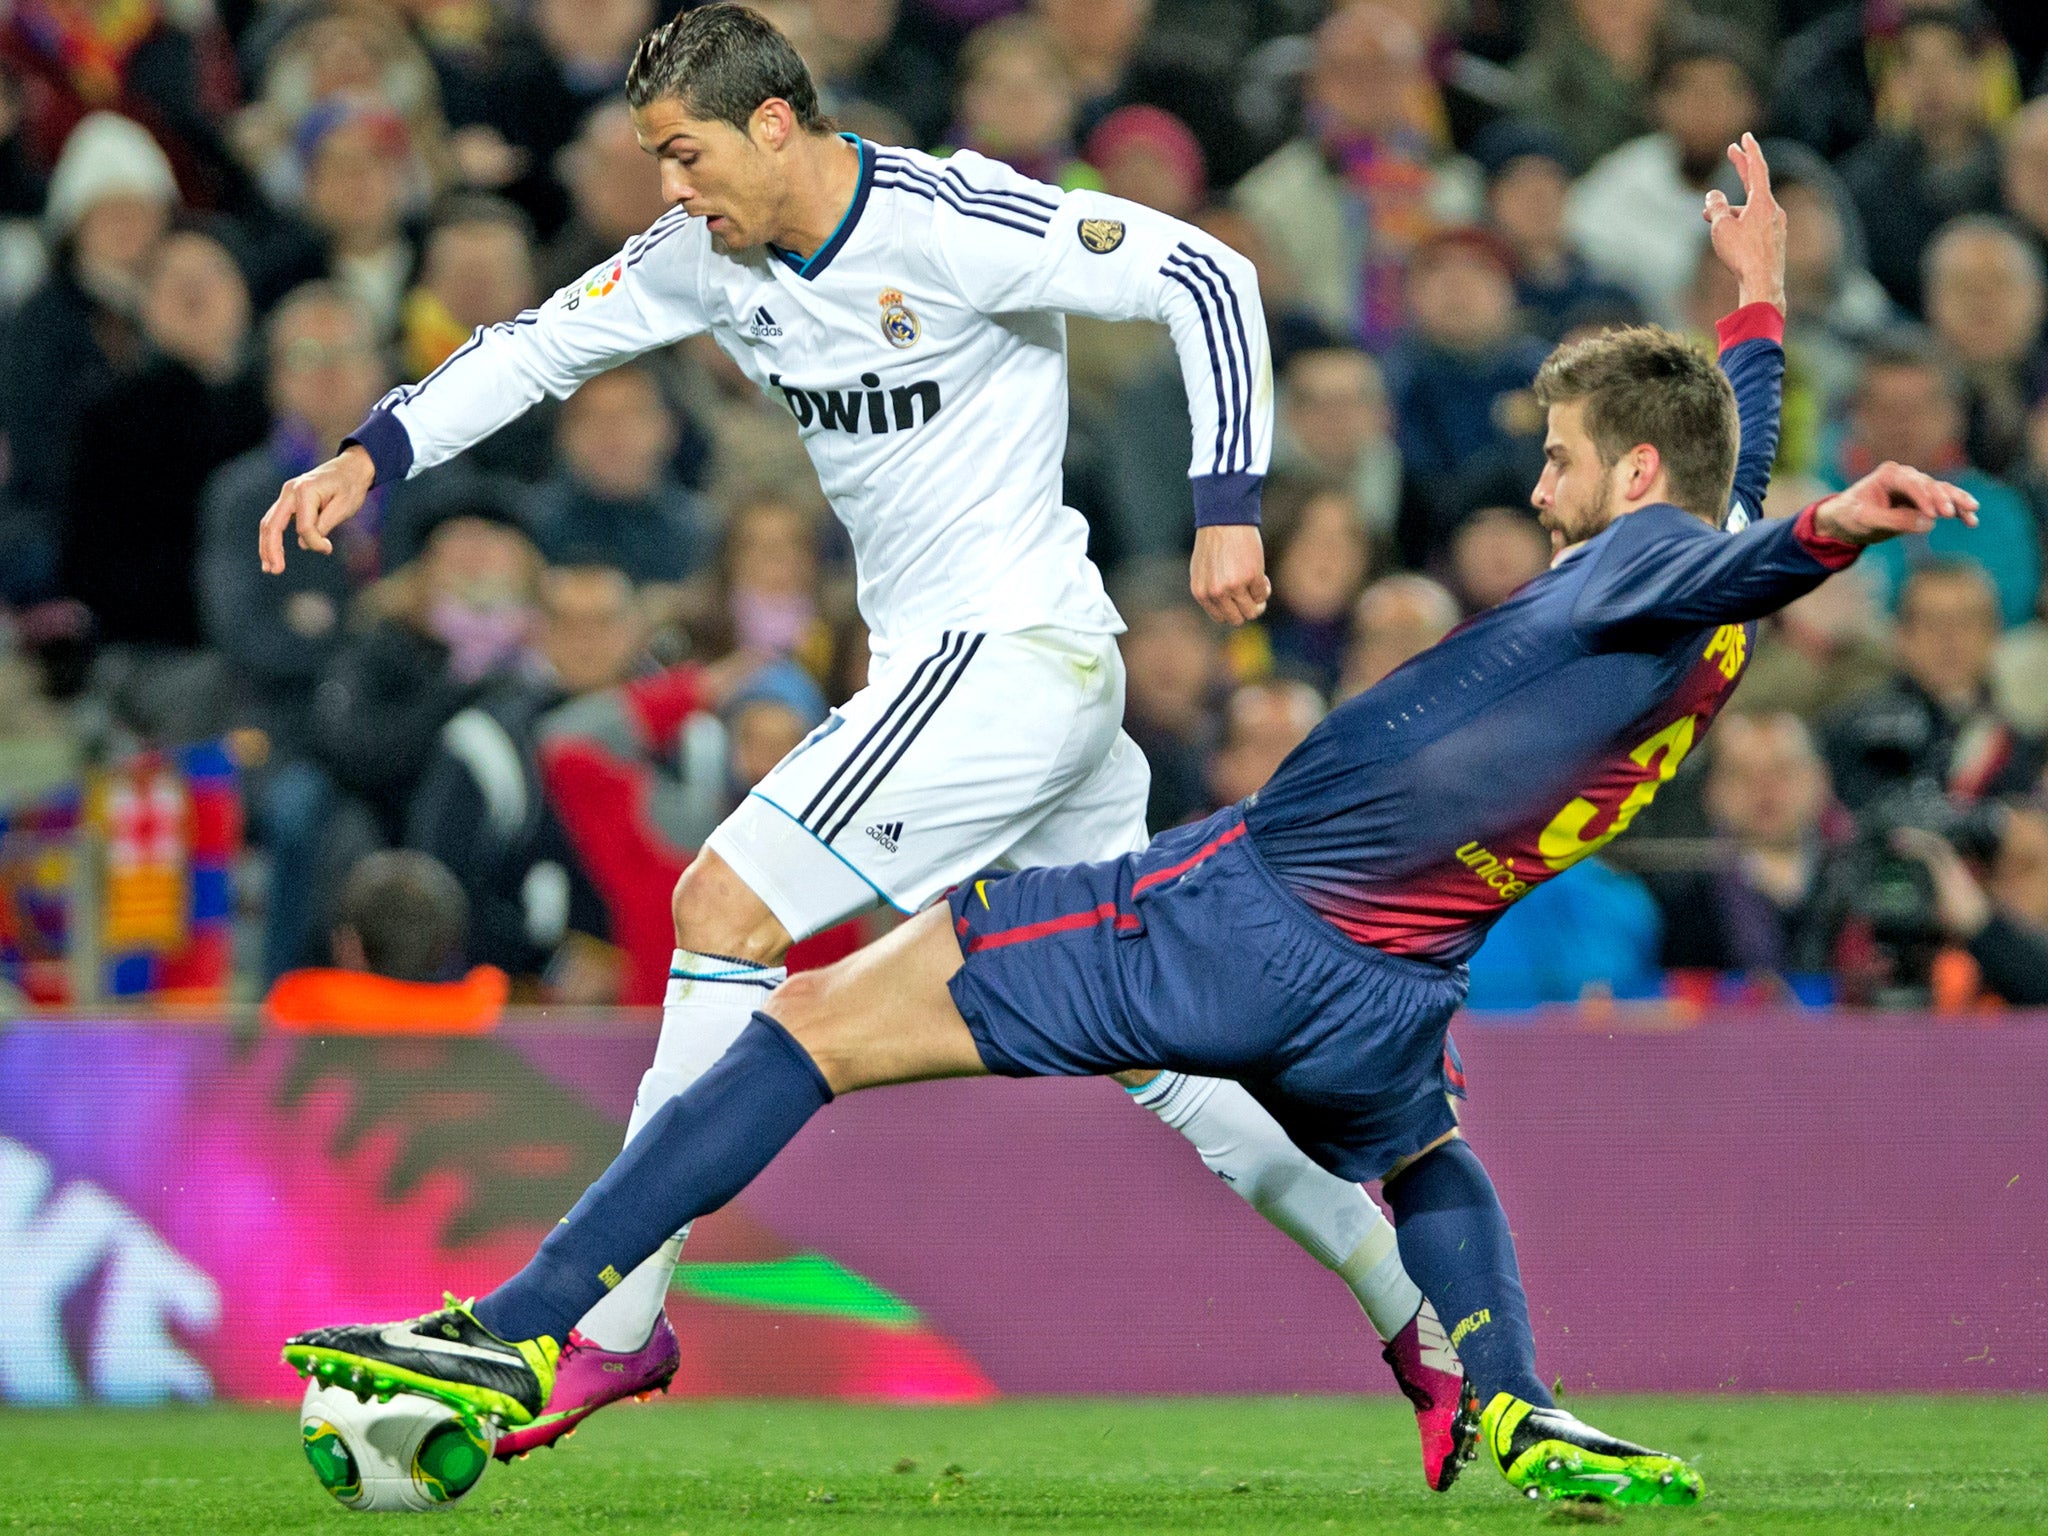 Barcelona's Gerard Pique tackles Real Madrid's Christiano Ronaldo during a typically fiery encounter between the sides earlier this year